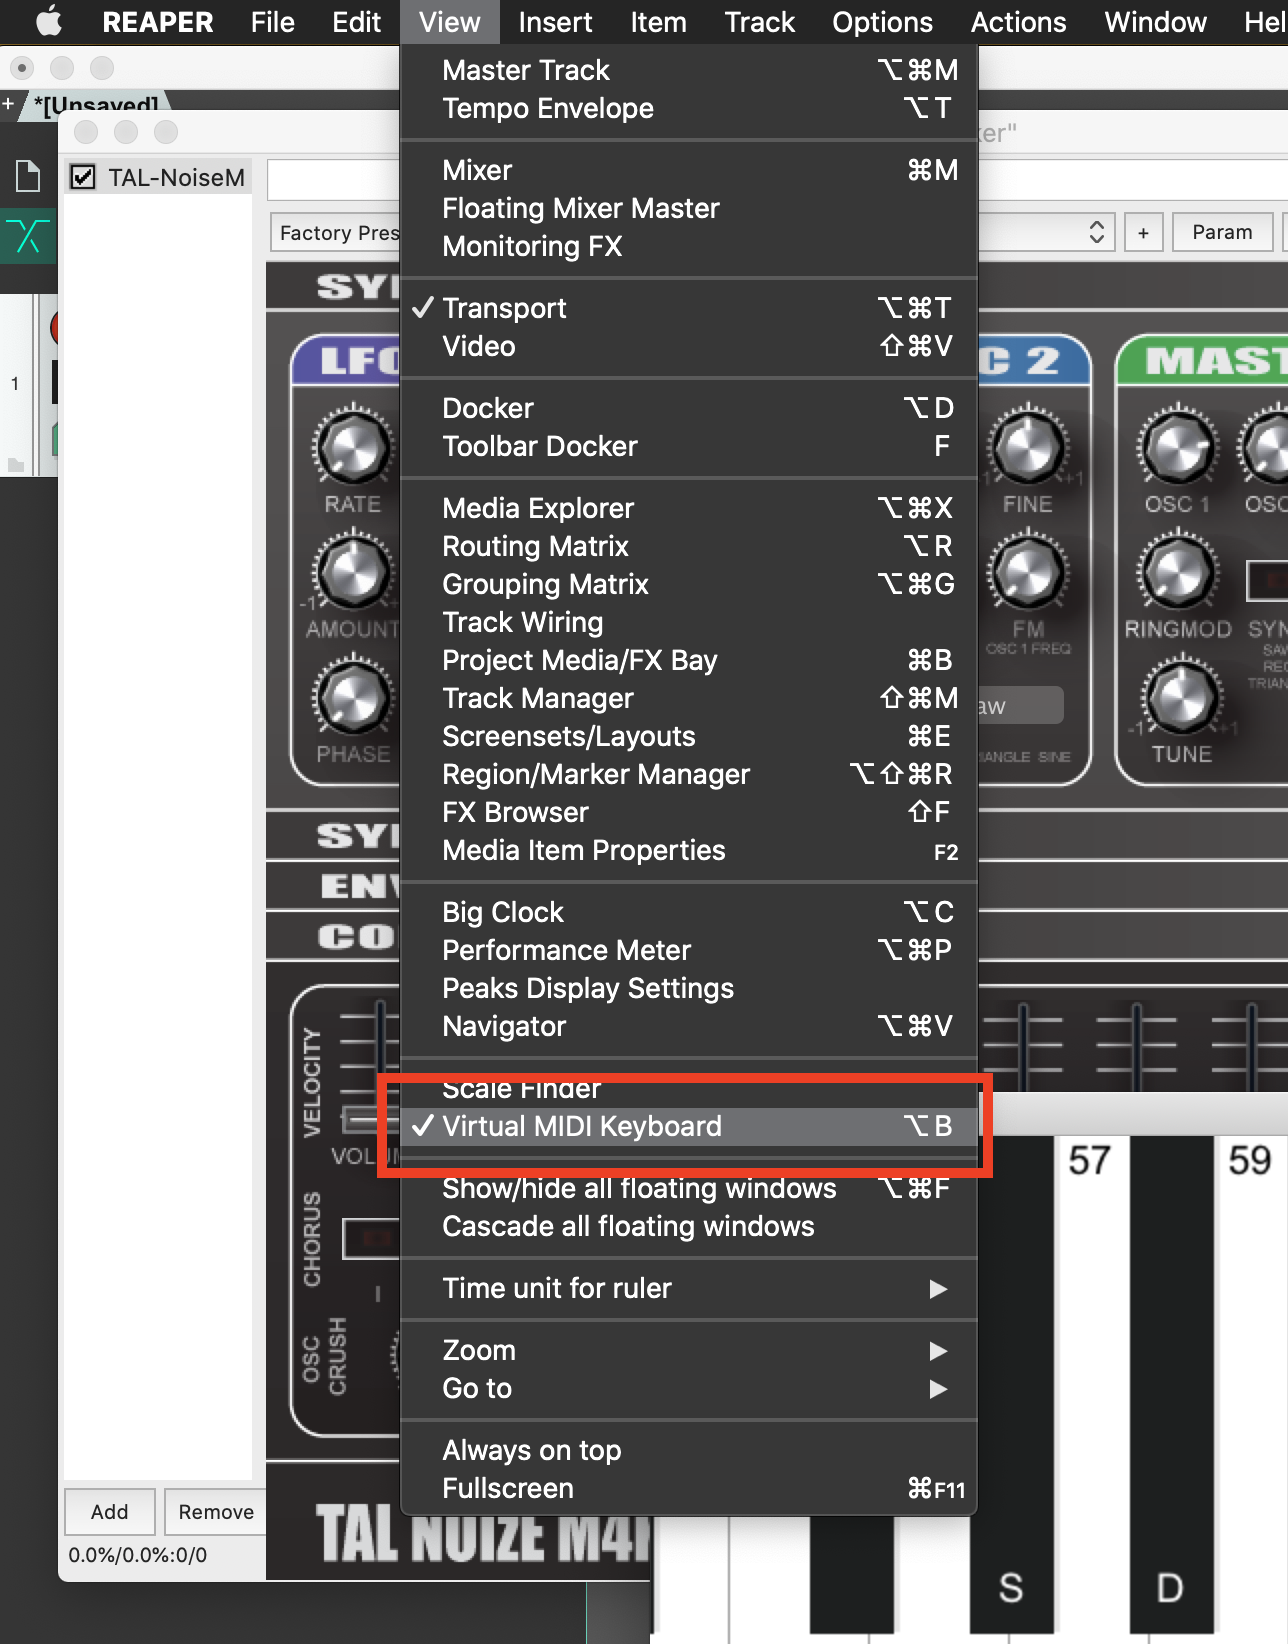 Example of opening the 'Virtual MIDI Keyboard in Reaper.